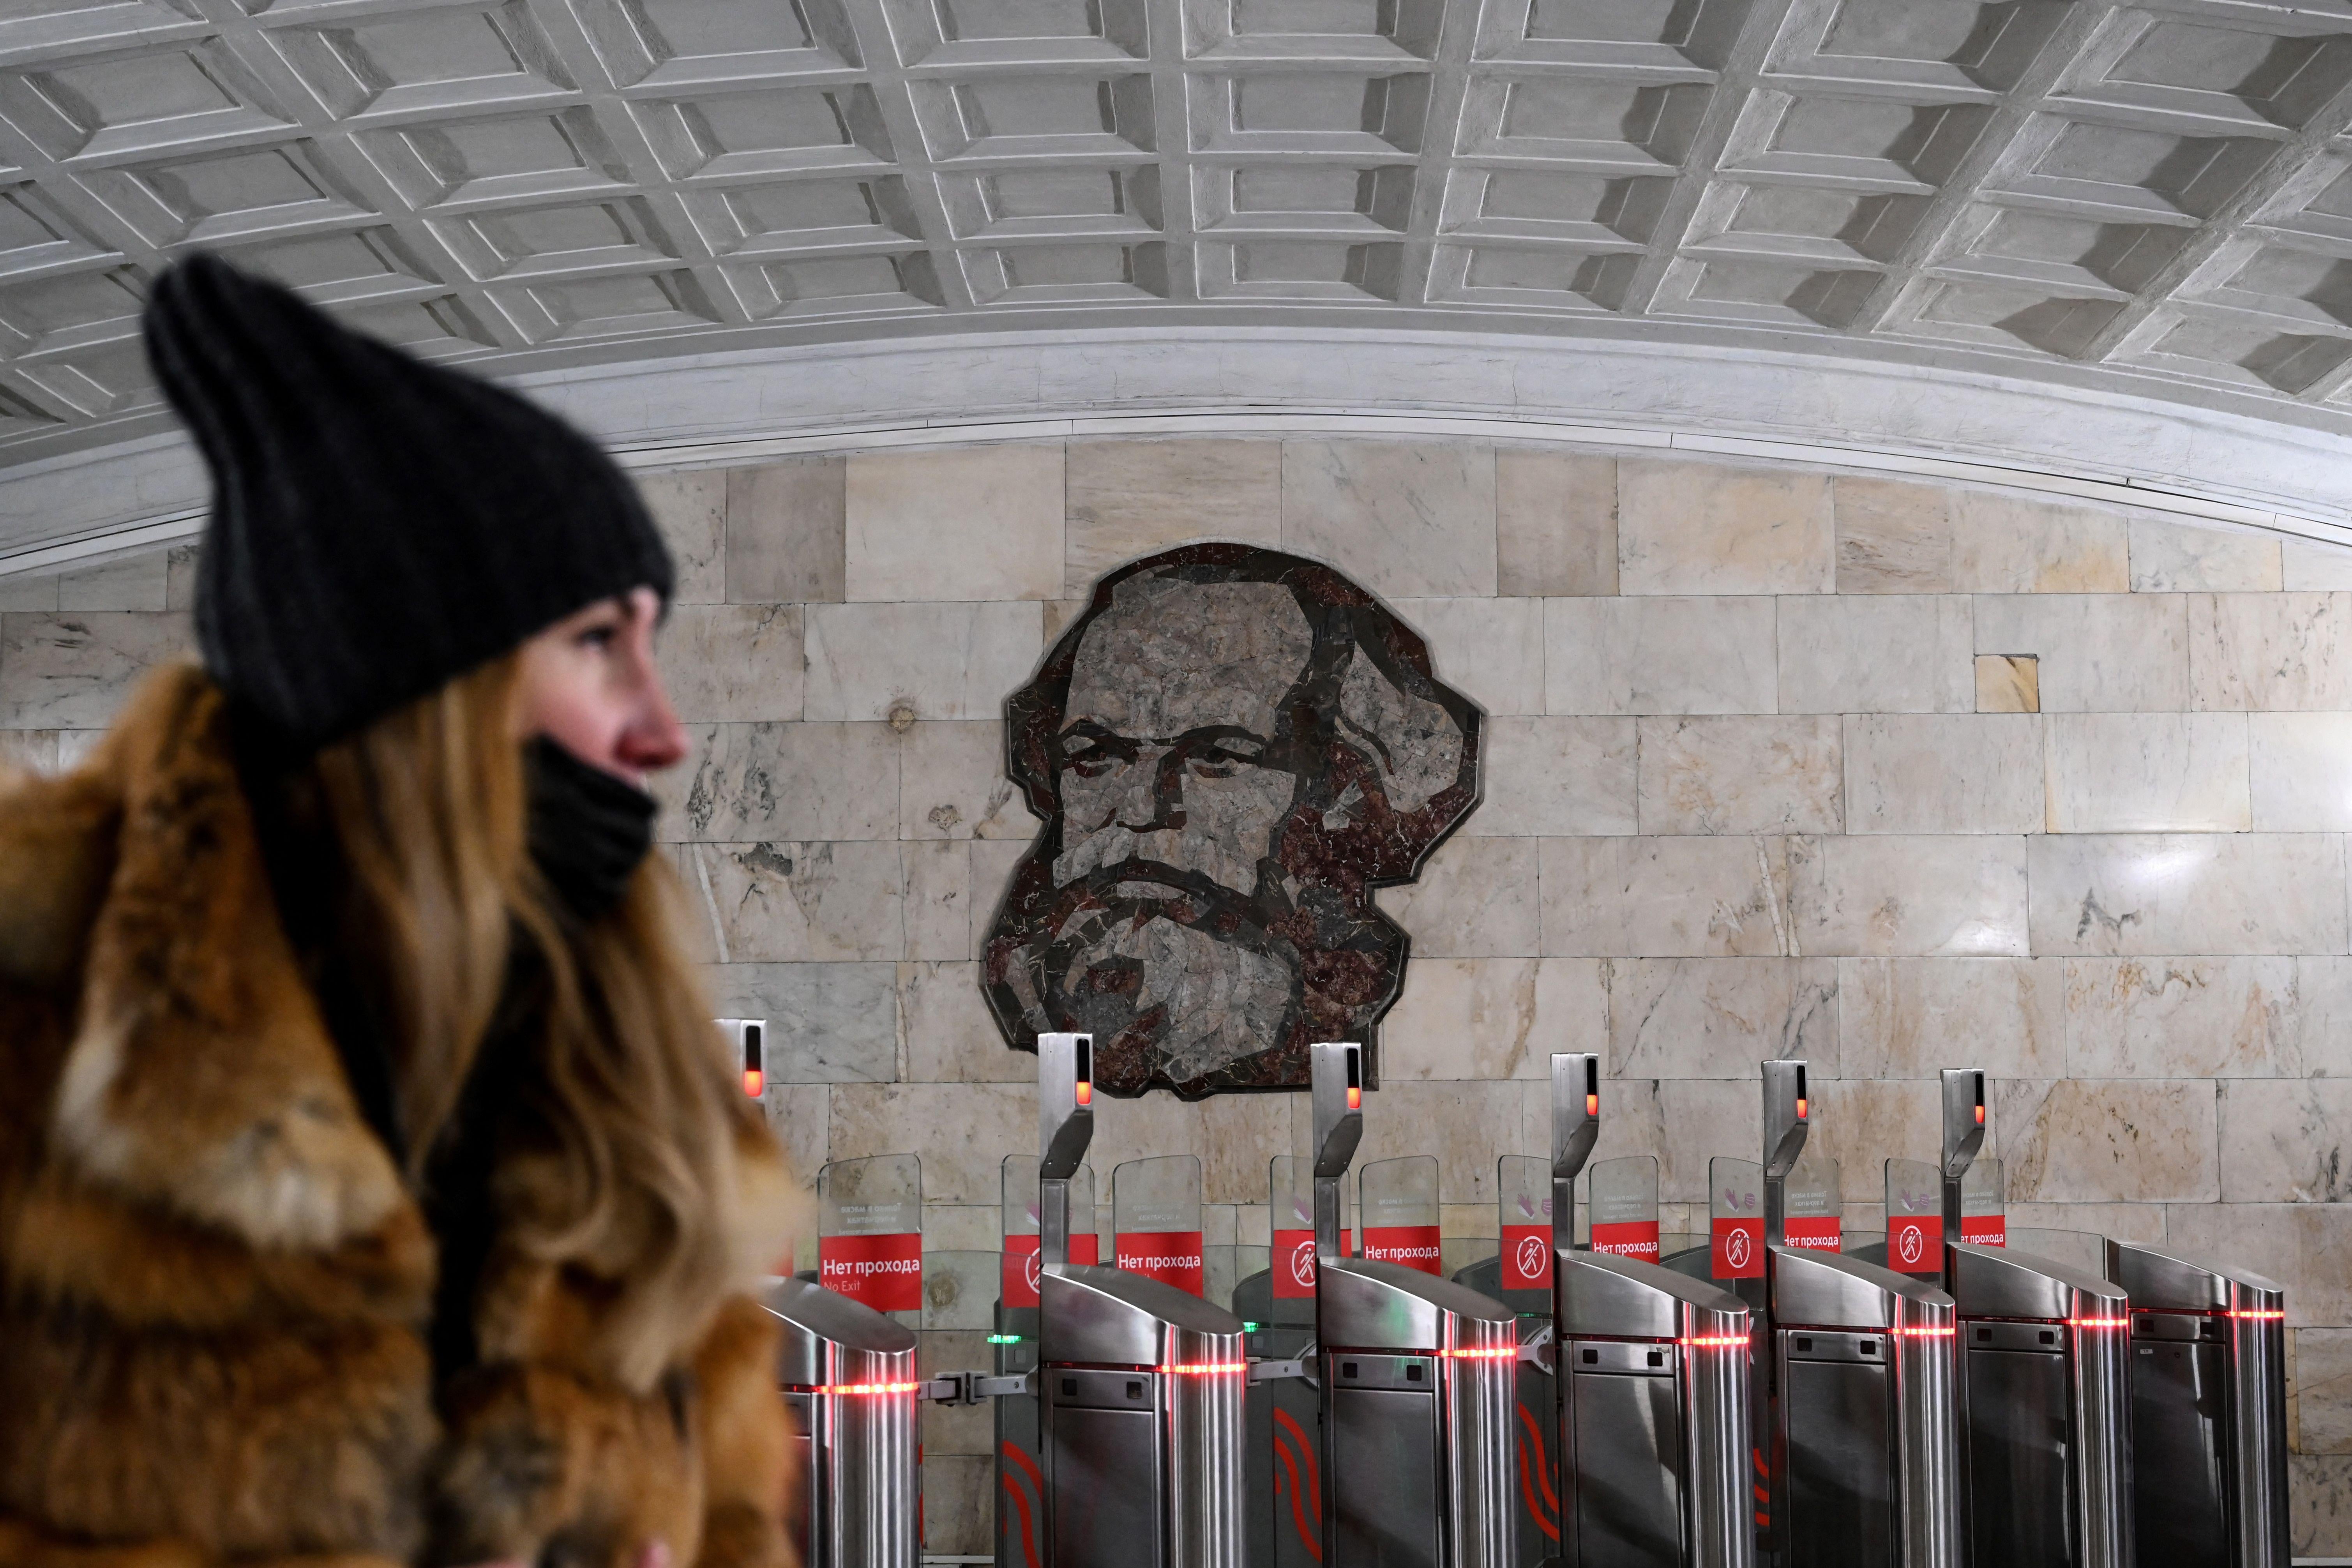 A woman wearing a face mask walks in front of an image of German philosopher and economist Karl Marx in subway in Moscow on March 12, 2021.